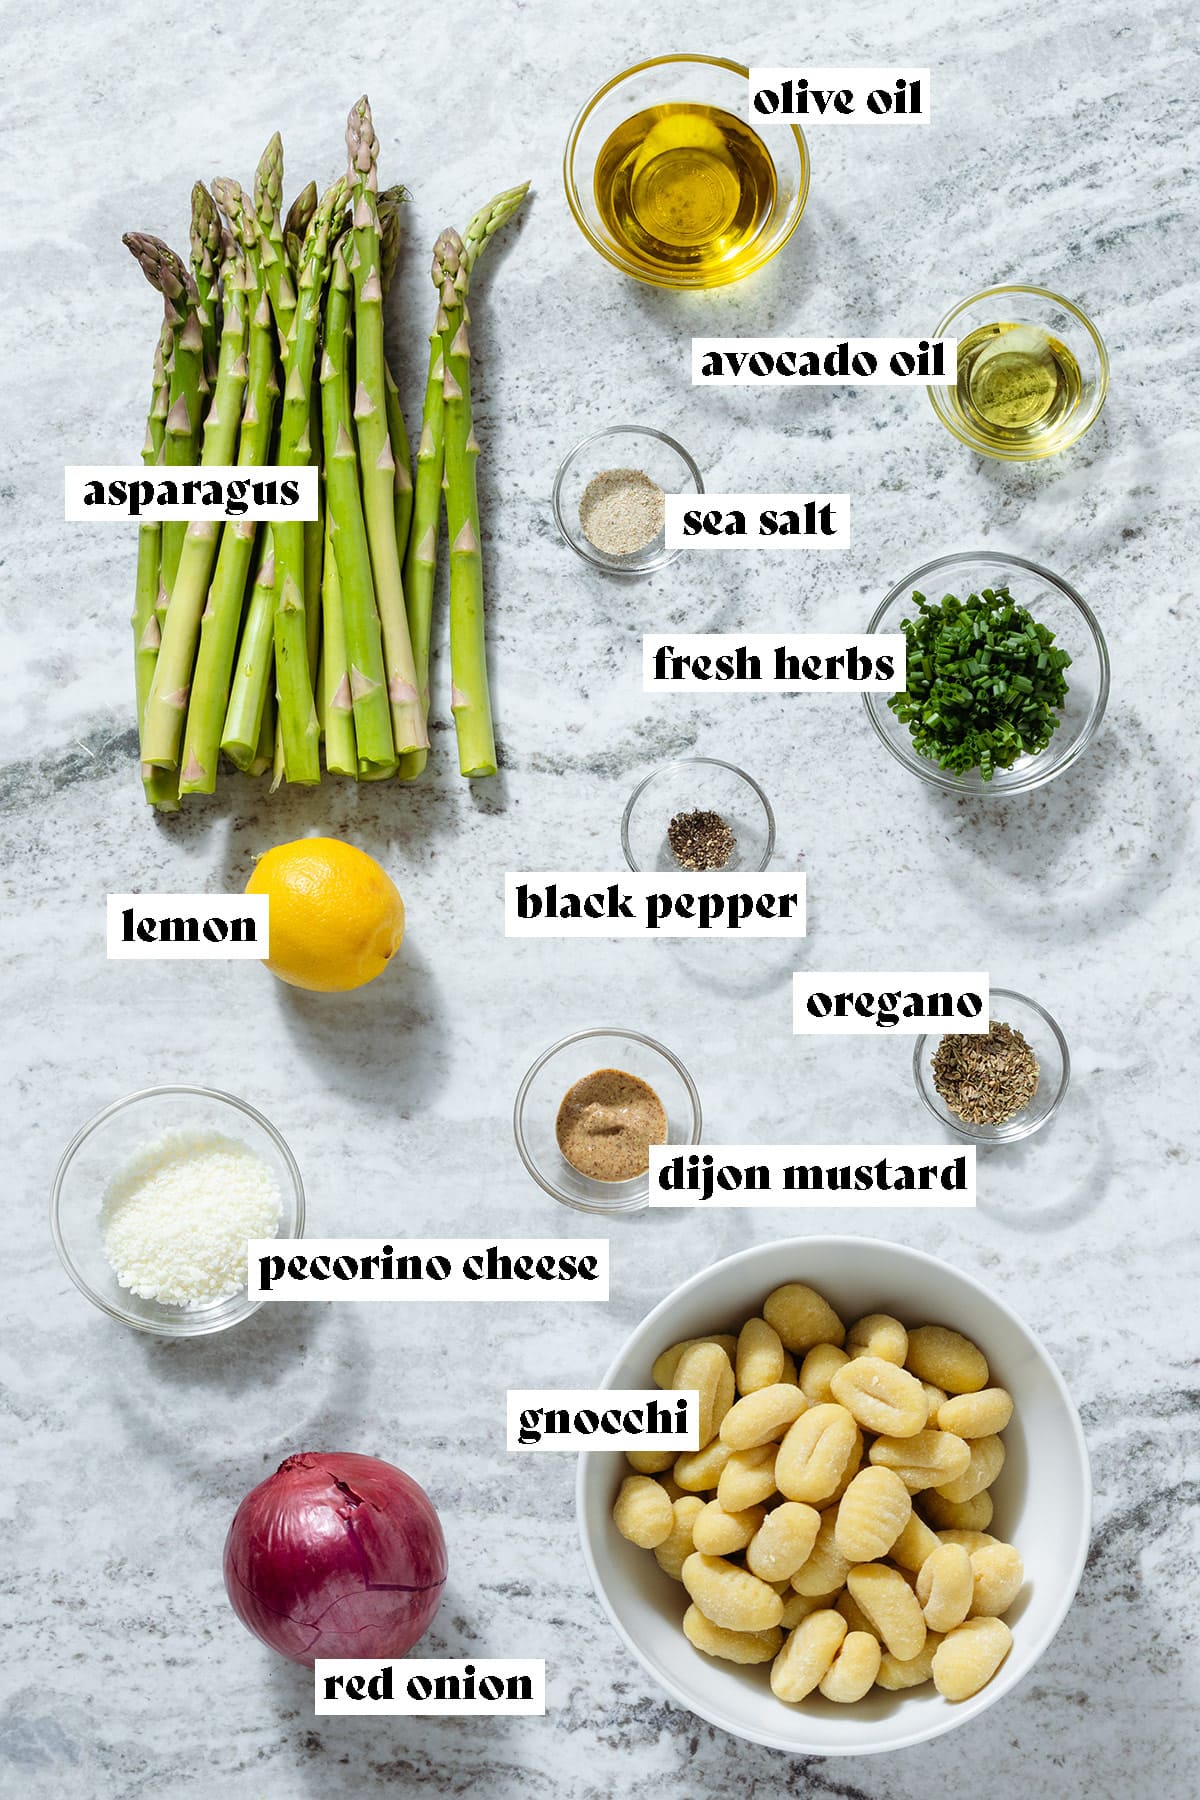 Asparagus, gnocchi, red onion, herbs, spices, and other ingredients laid out in small glass bowls with text overlay.